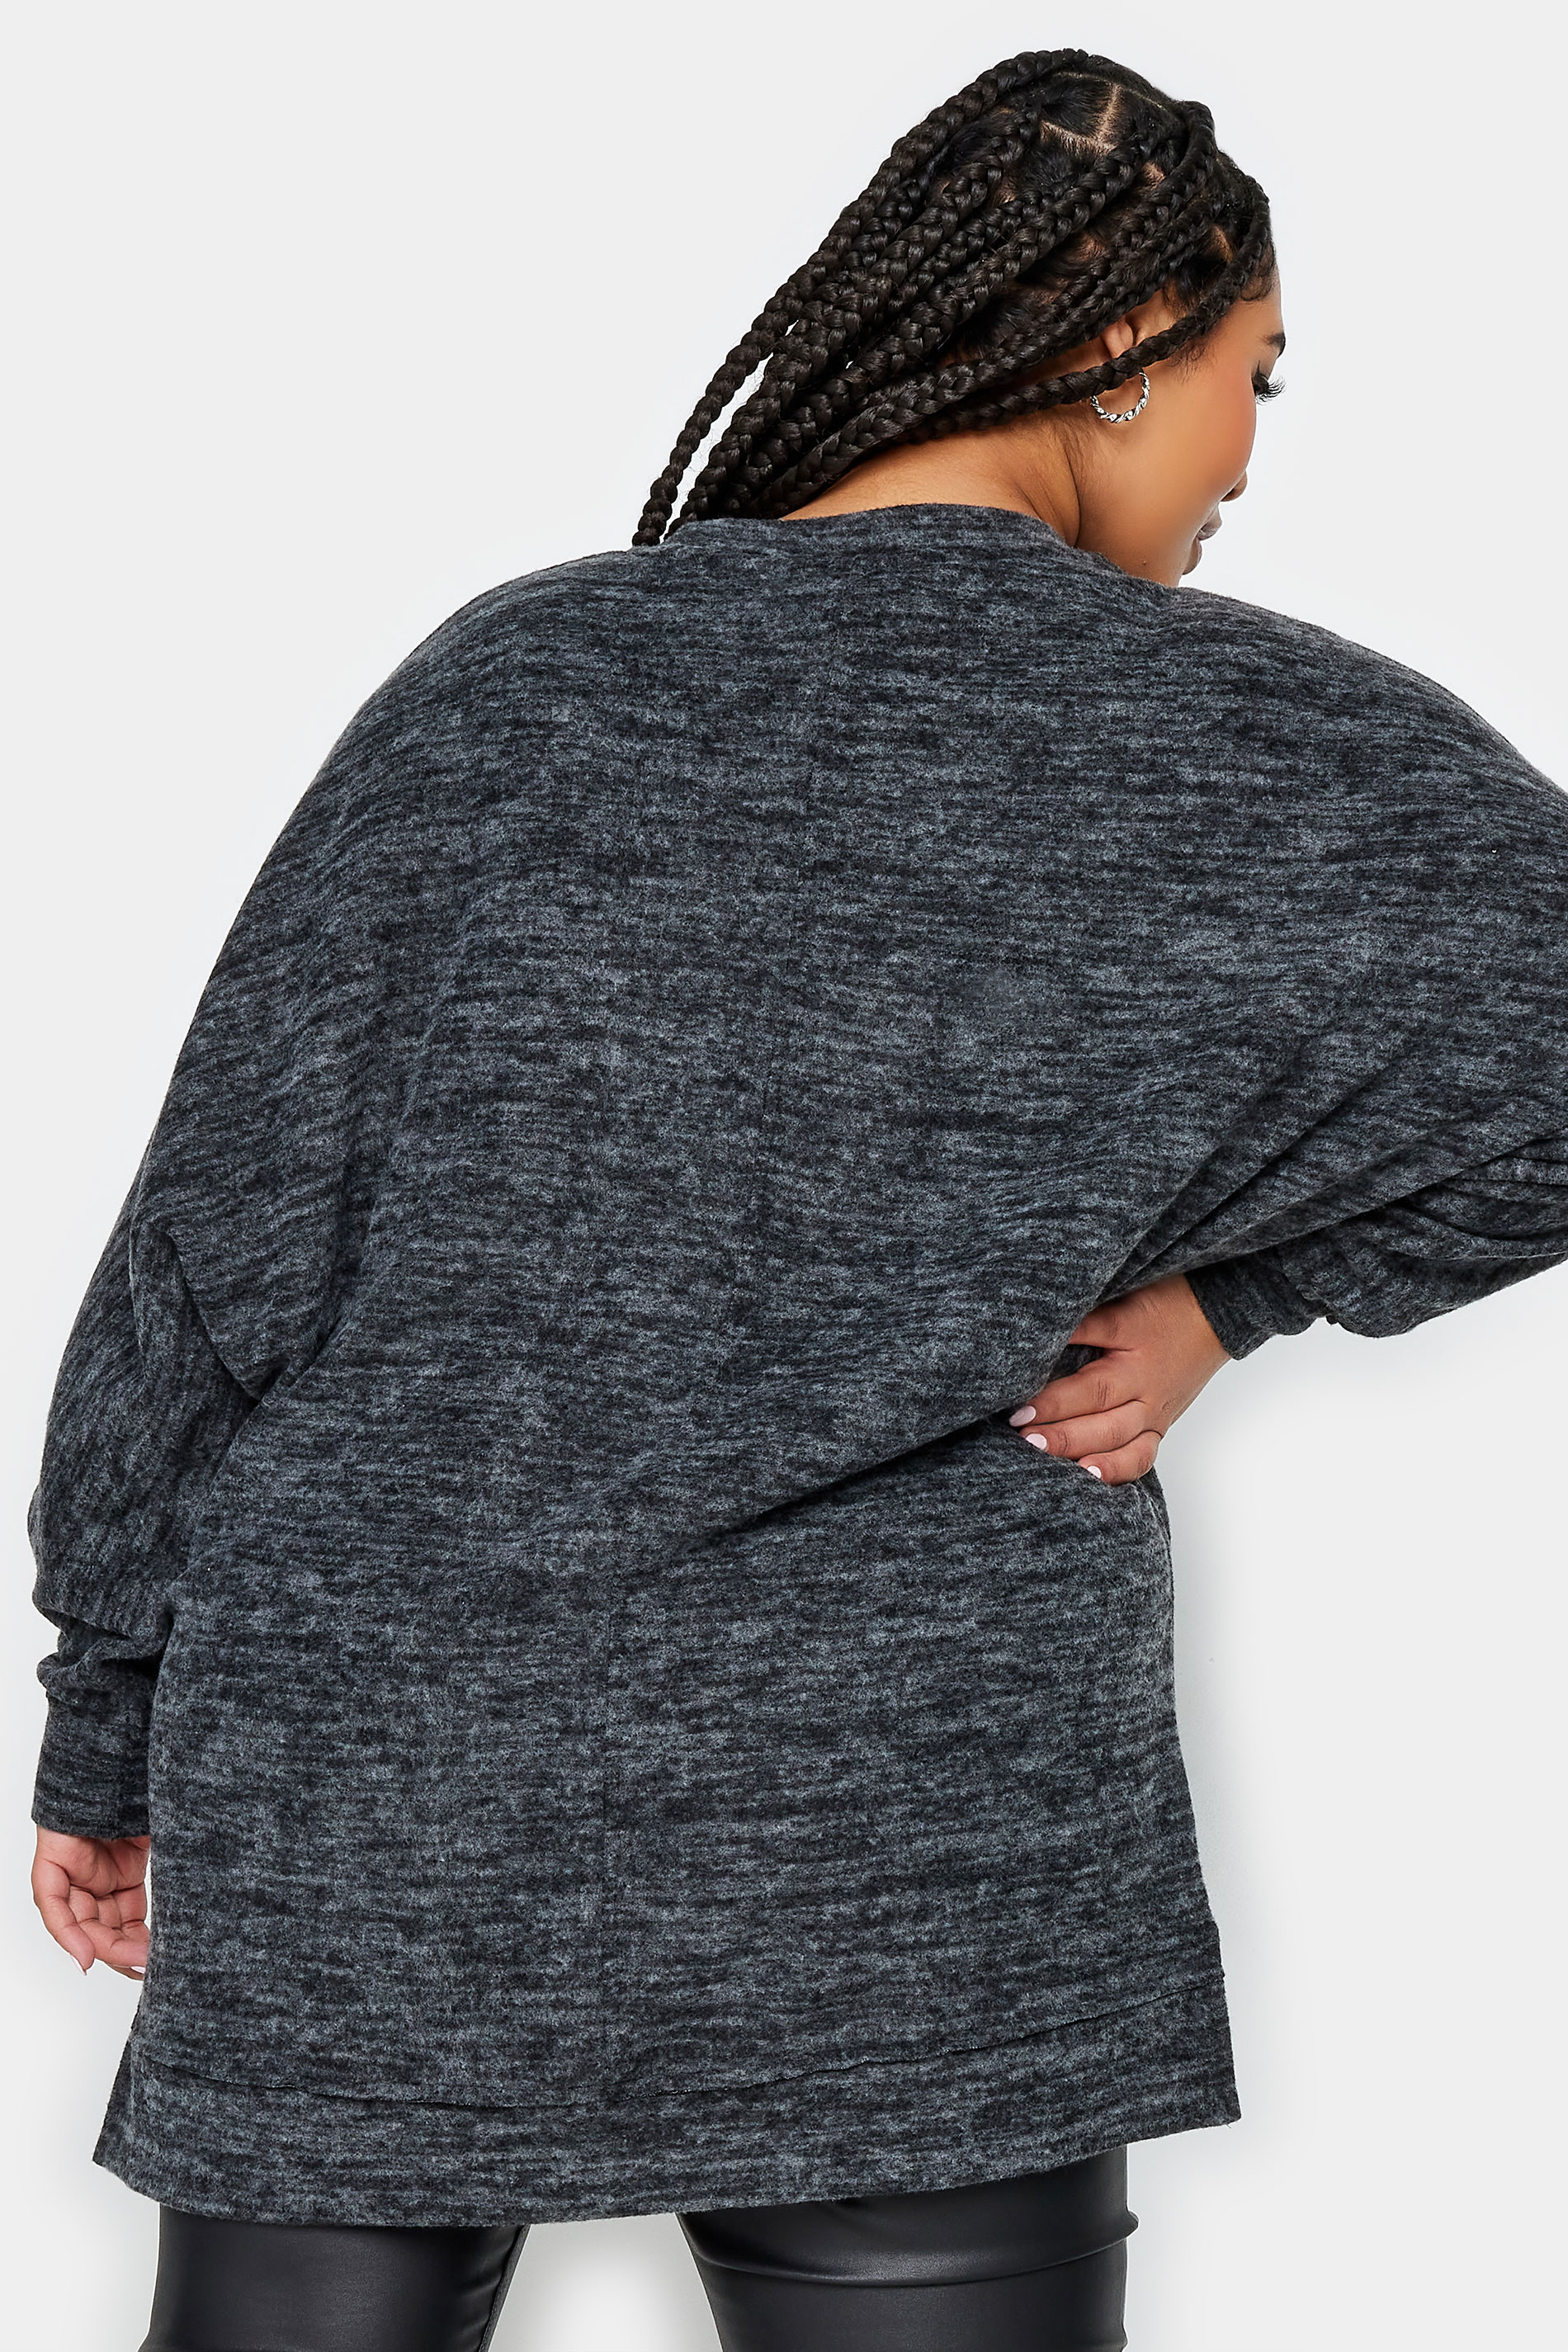 YOURS Plus Size Charcoal Grey Front Seam Soft Touch Sweatshirt | Yours Clothing 3